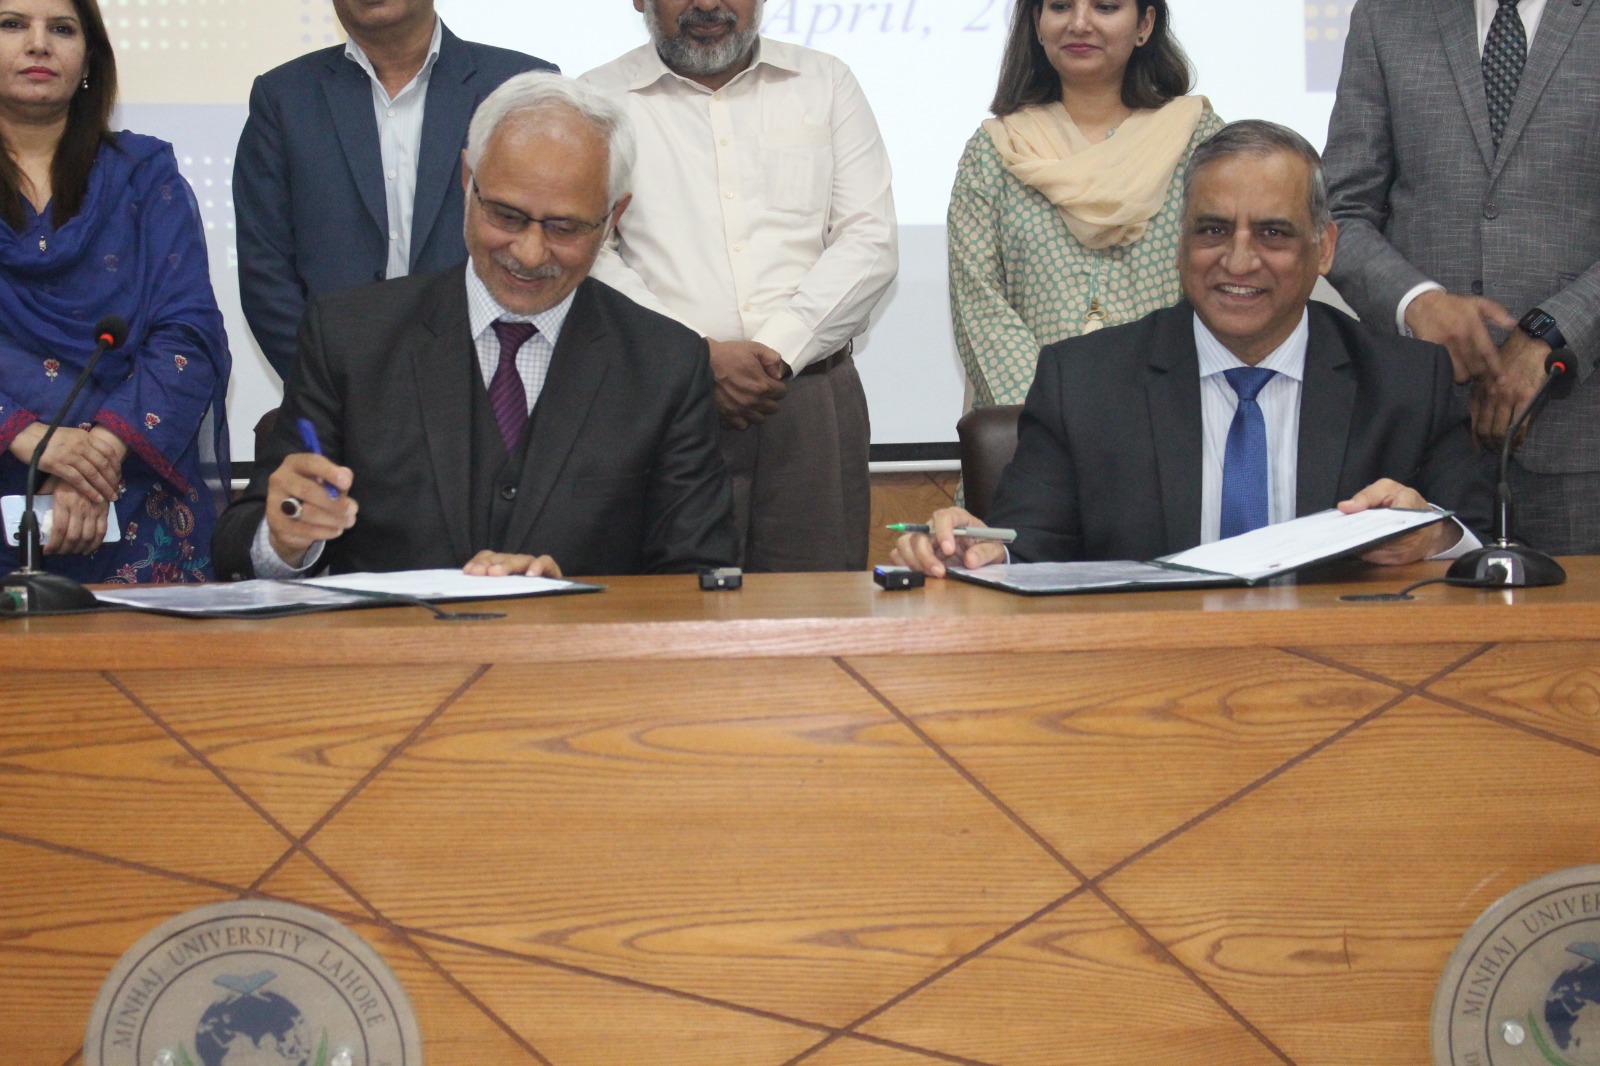 MoU signing Ceremony with GCUL